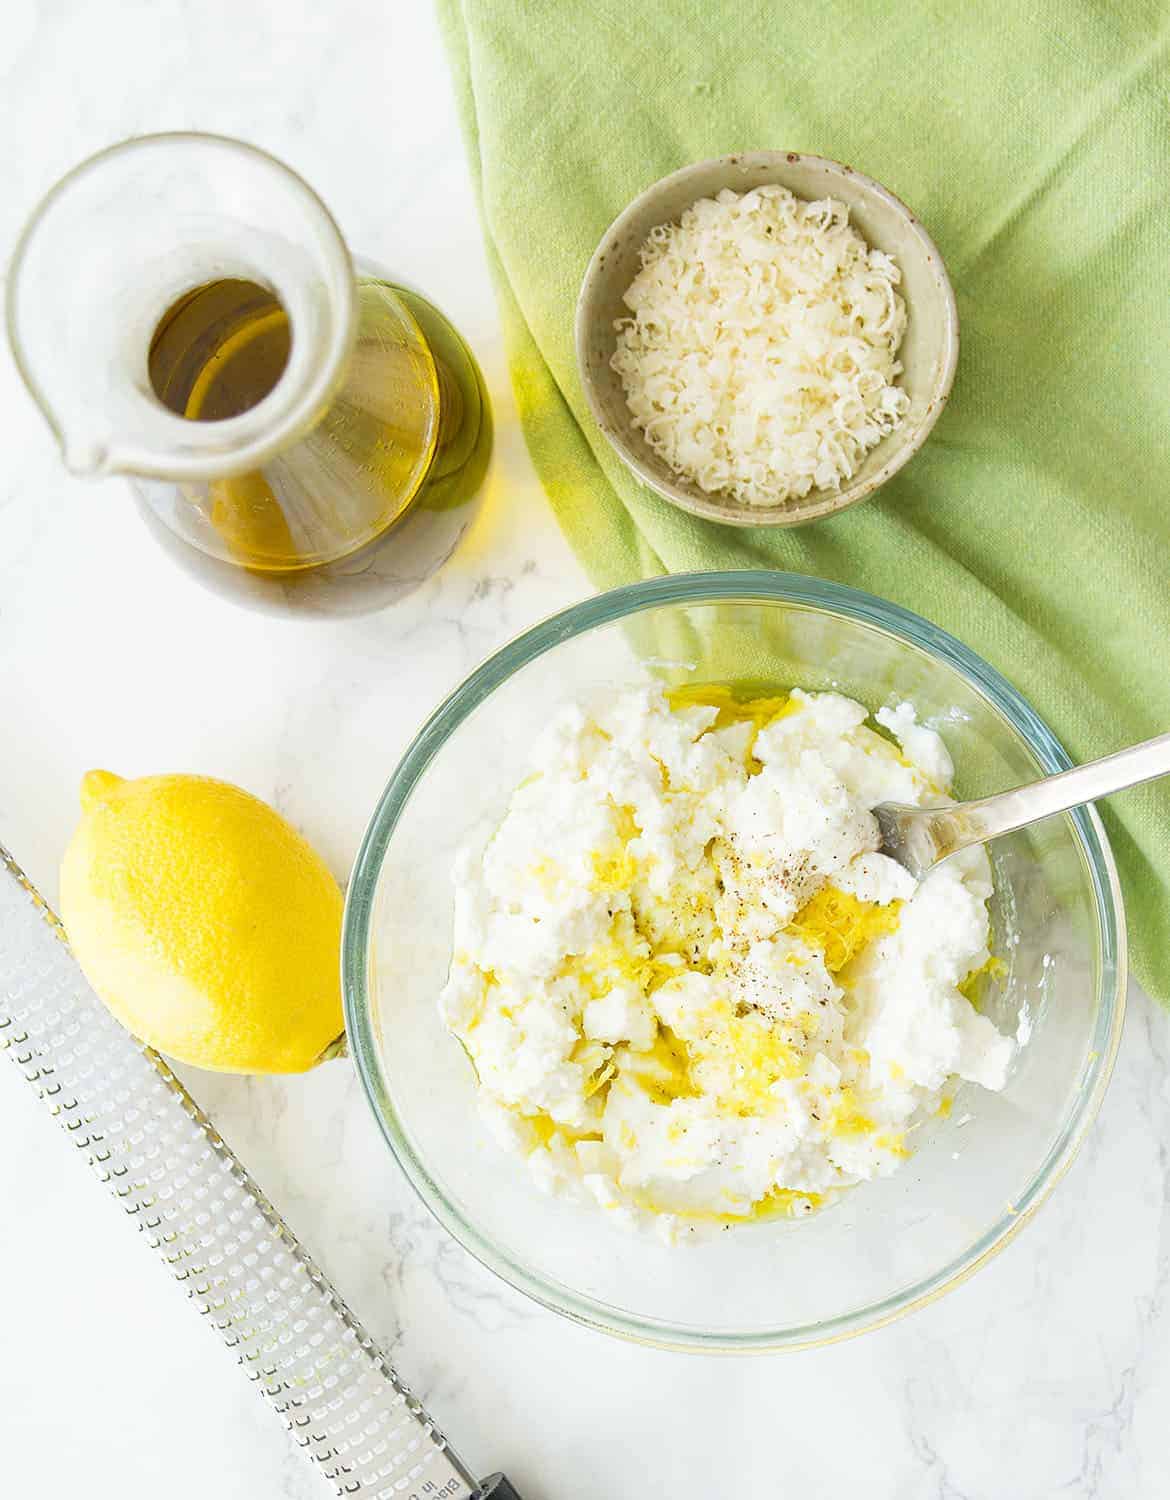 Ricotta, lemon zest, olive oil and parmesan are mixed with a spoon on a glass bowl.